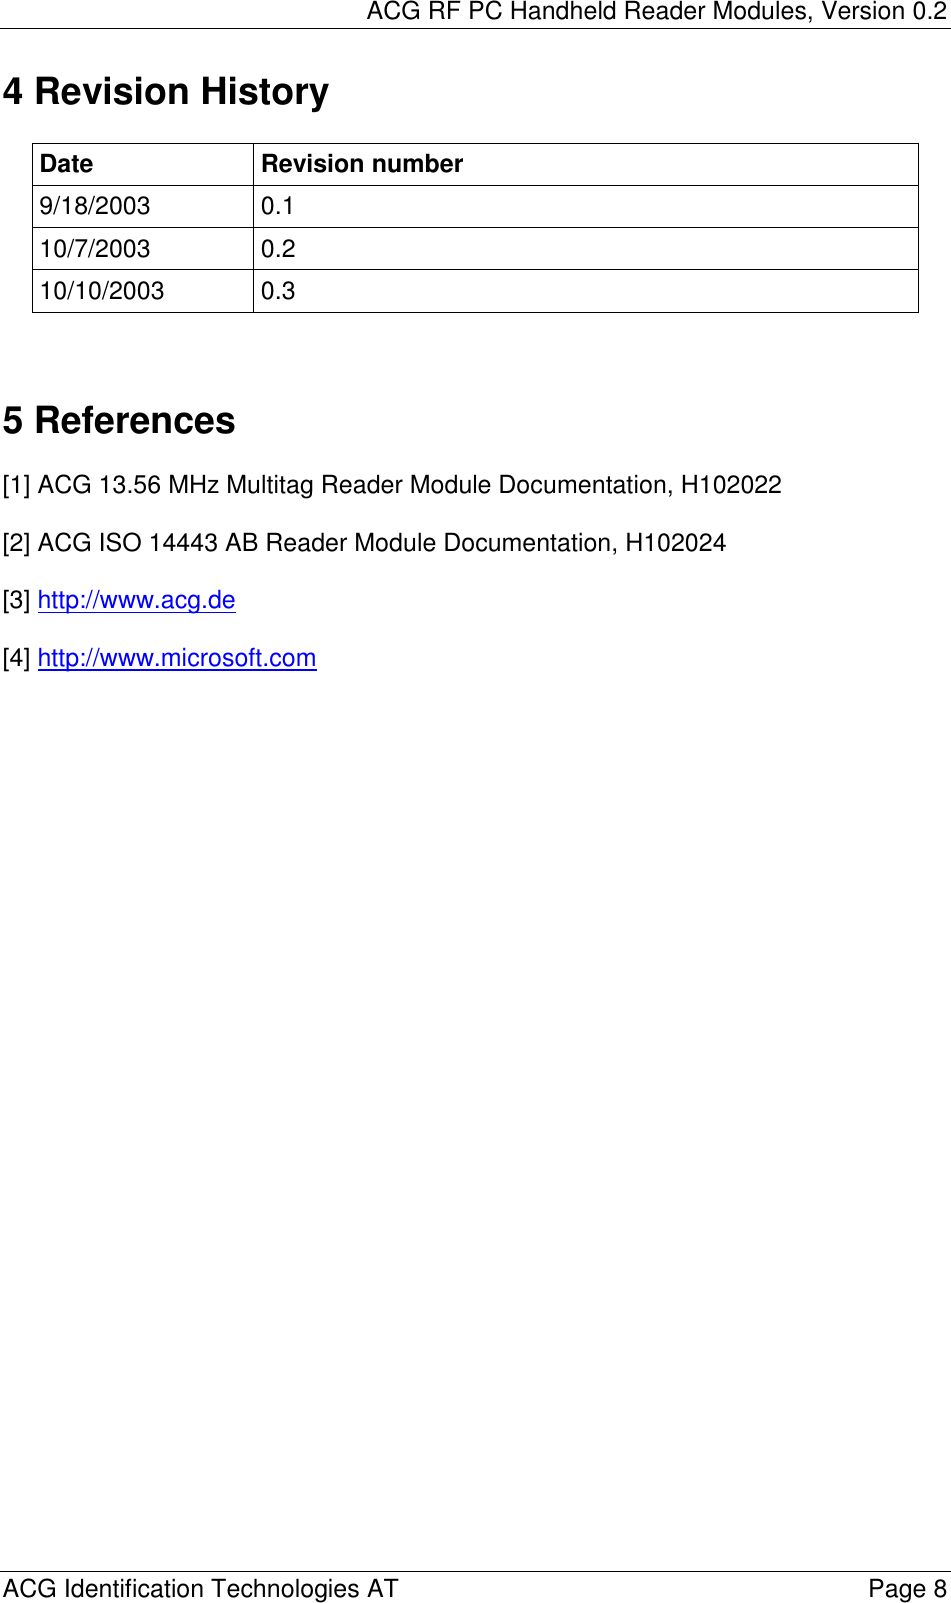 ACG RF PC Handheld Reader Modules, Version 0.2  ACG Identification Technologies AT    Page 8 4 Revision History  Date Revision number 9/18/2003 0.1 10/7/2003 0.2 10/10/2003 0.3    5 References  [1] ACG 13.56 MHz Multitag Reader Module Documentation, H102022  [2] ACG ISO 14443 AB Reader Module Documentation, H102024  [3] http://www.acg.de   [4] http://www.microsoft.com   